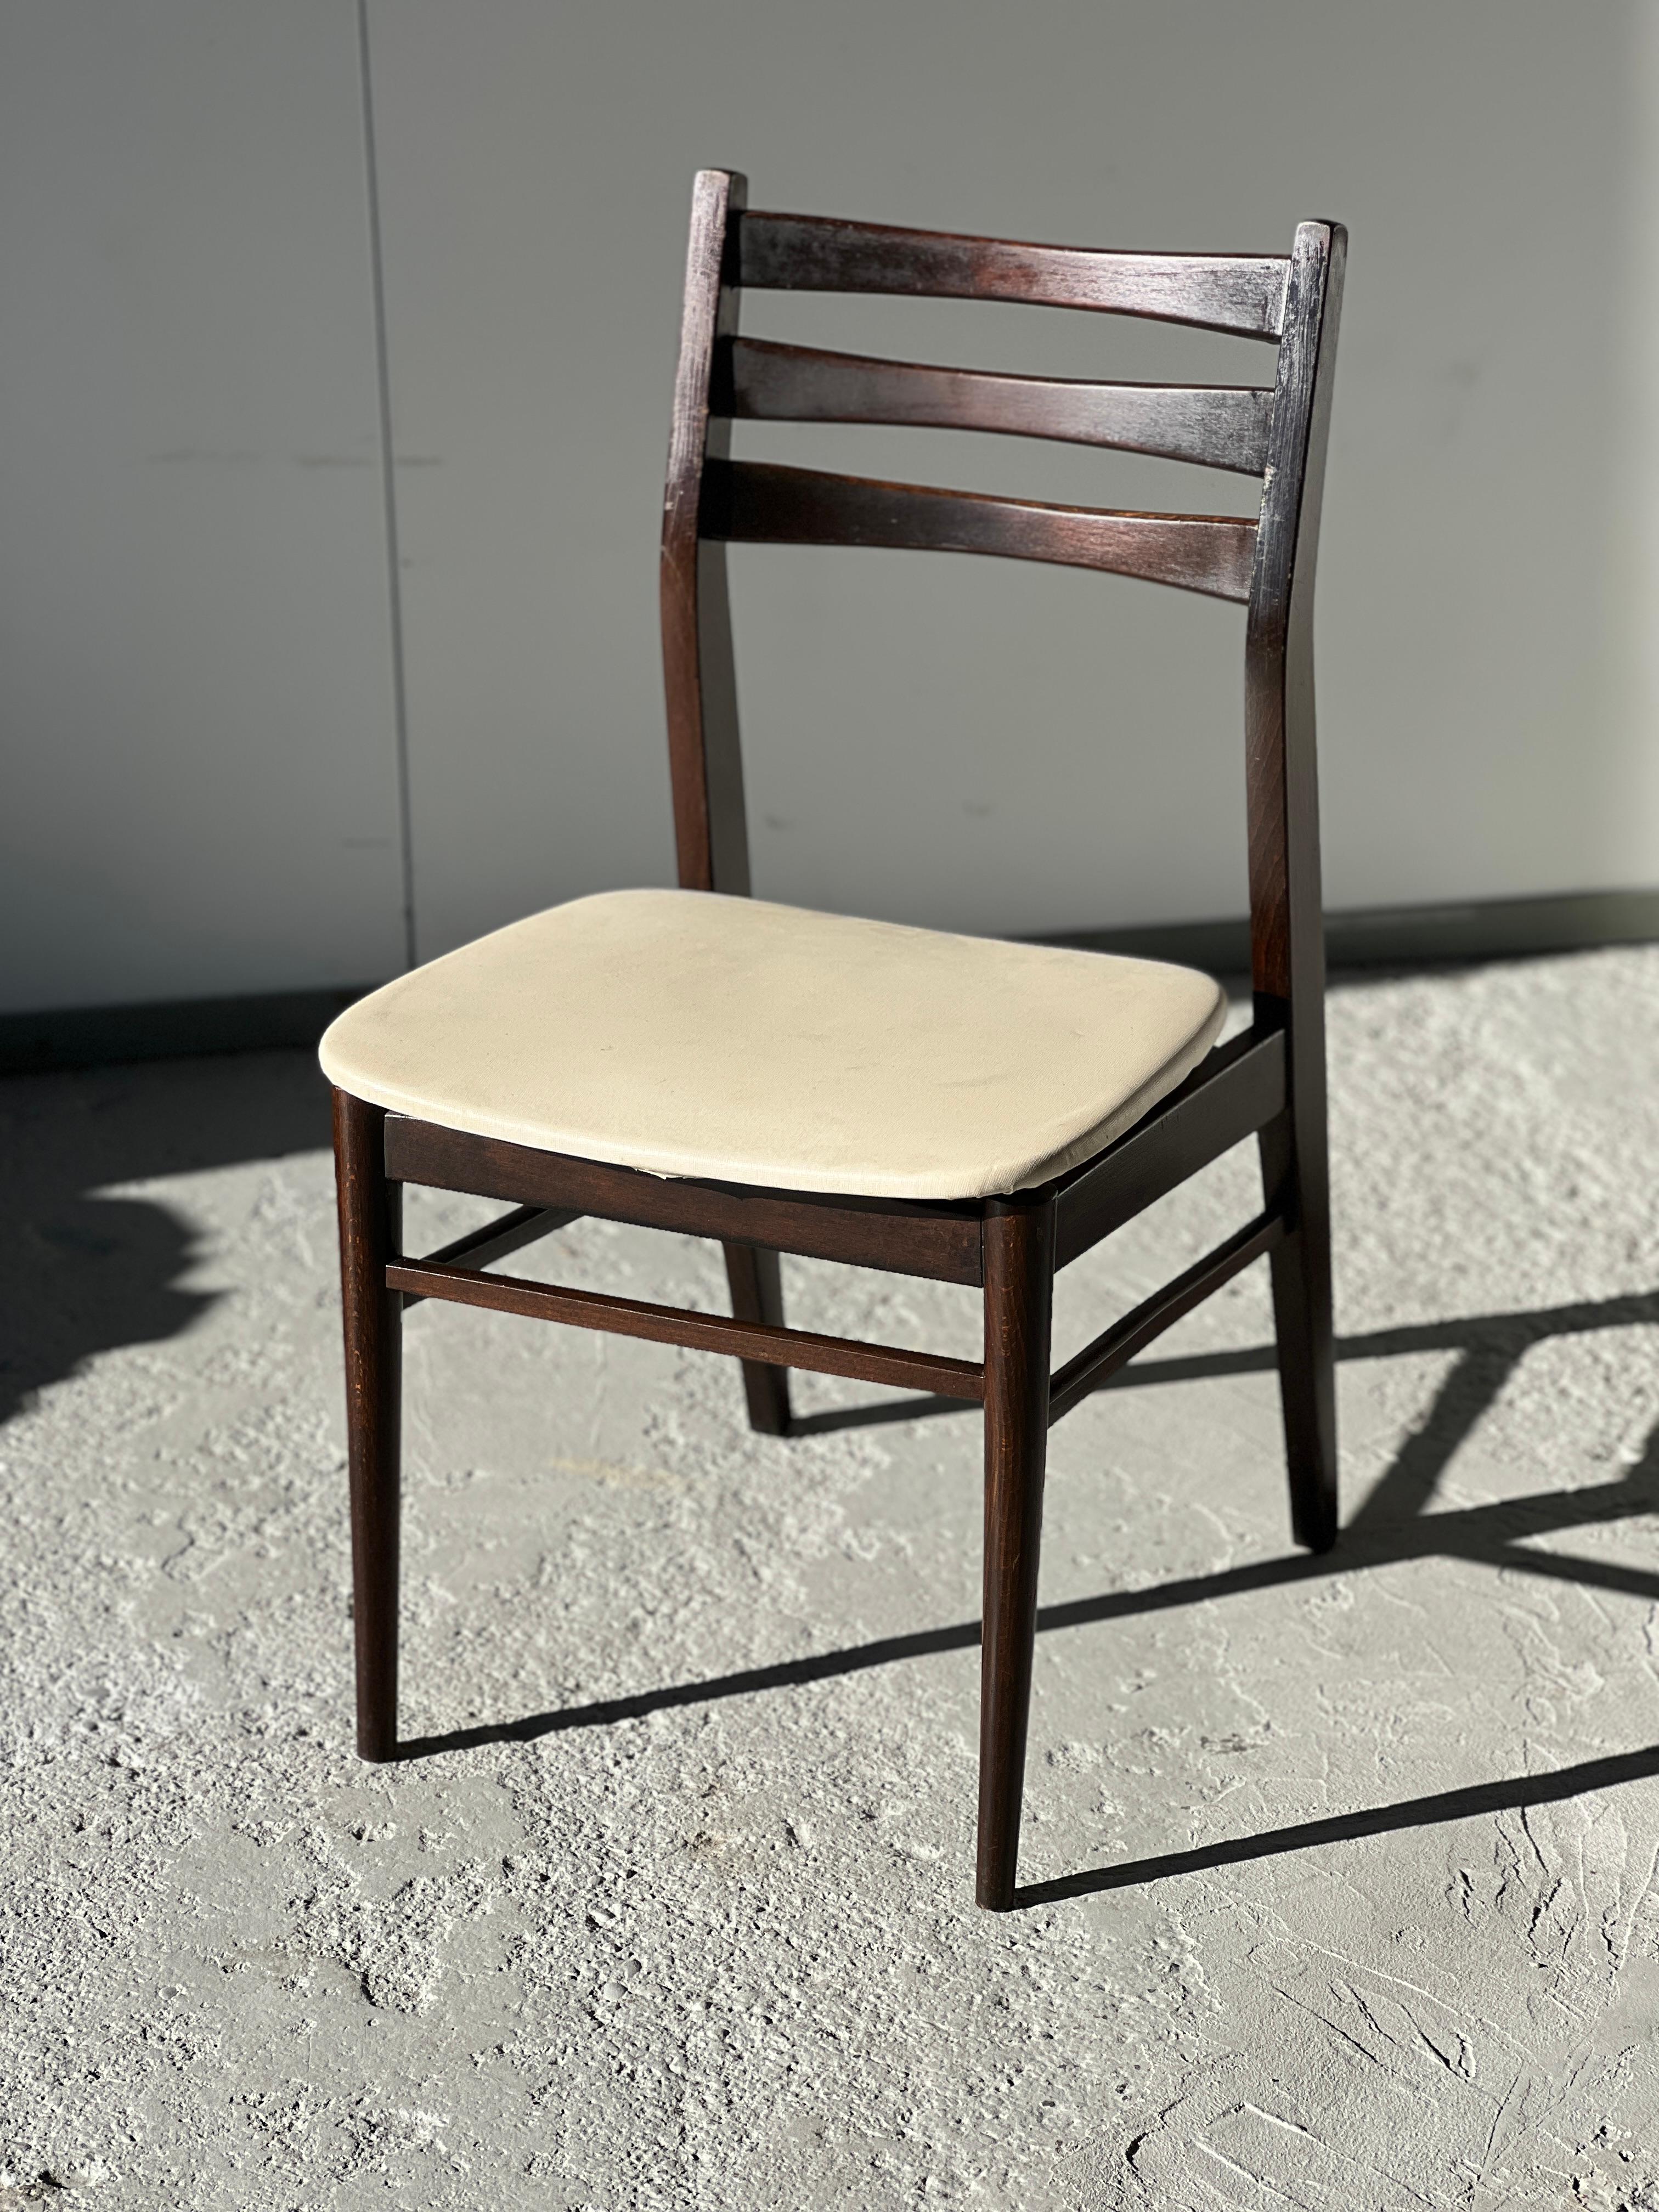 Set of 8 Scandinavian chairs by Vestervig Eriksen for BRBR Tromborg 1960 In Good Condition For Sale In Saint Rémy de Provence, FR